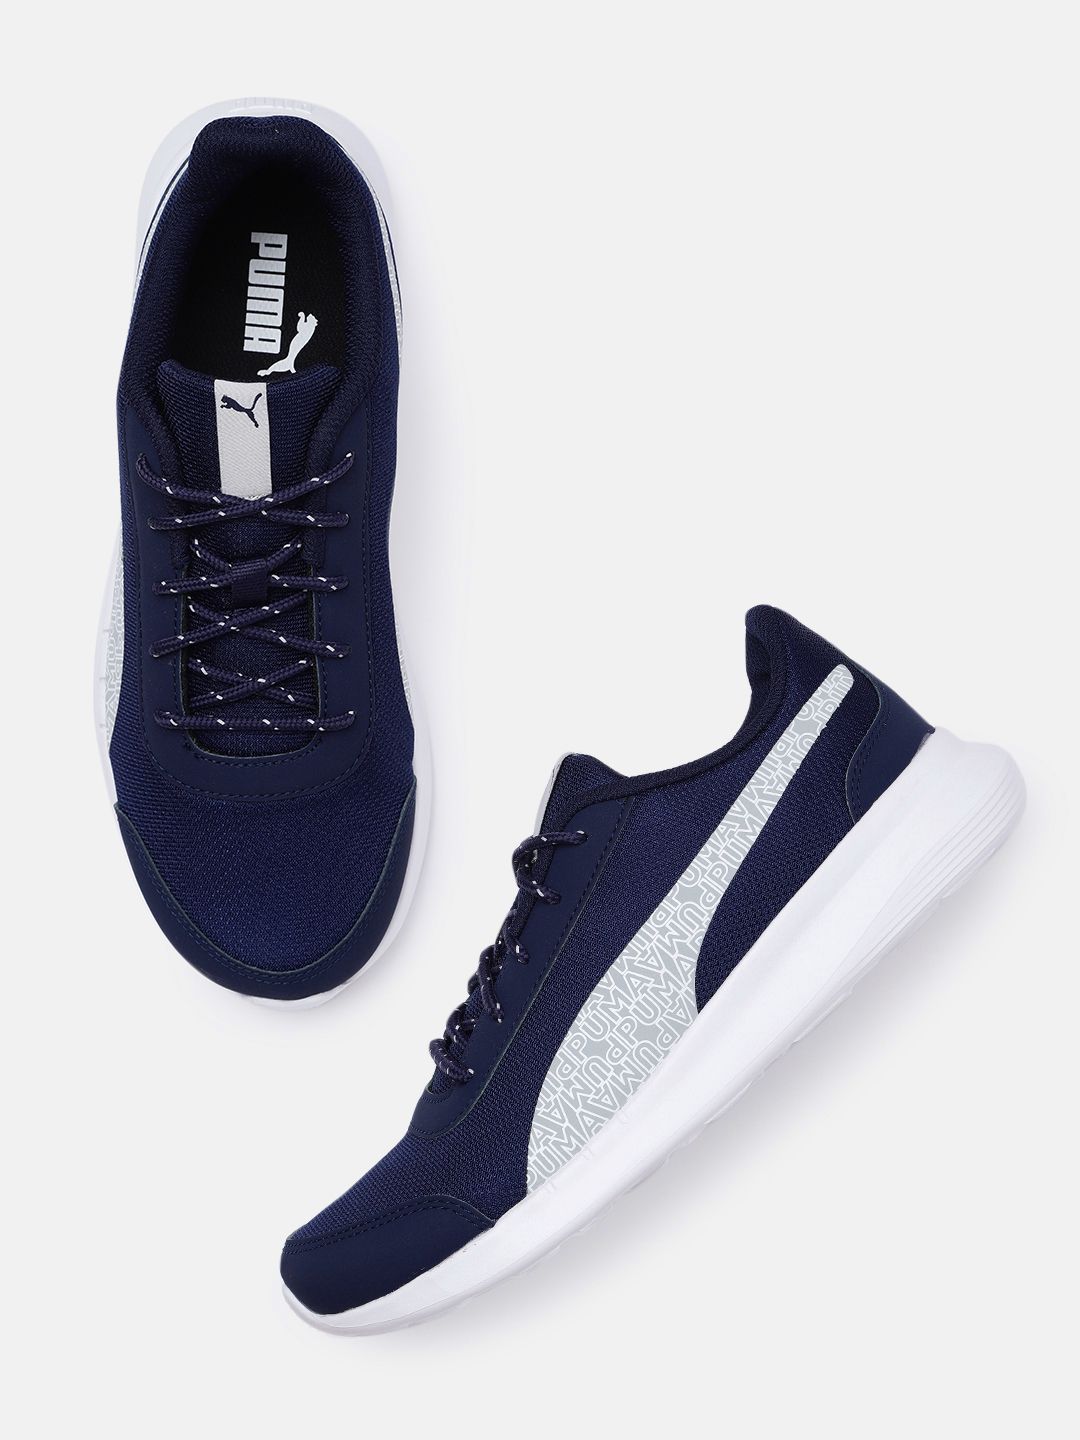 Puma Unisex Navy Blue Solid Daze V2 Casual Sneakers Price in India